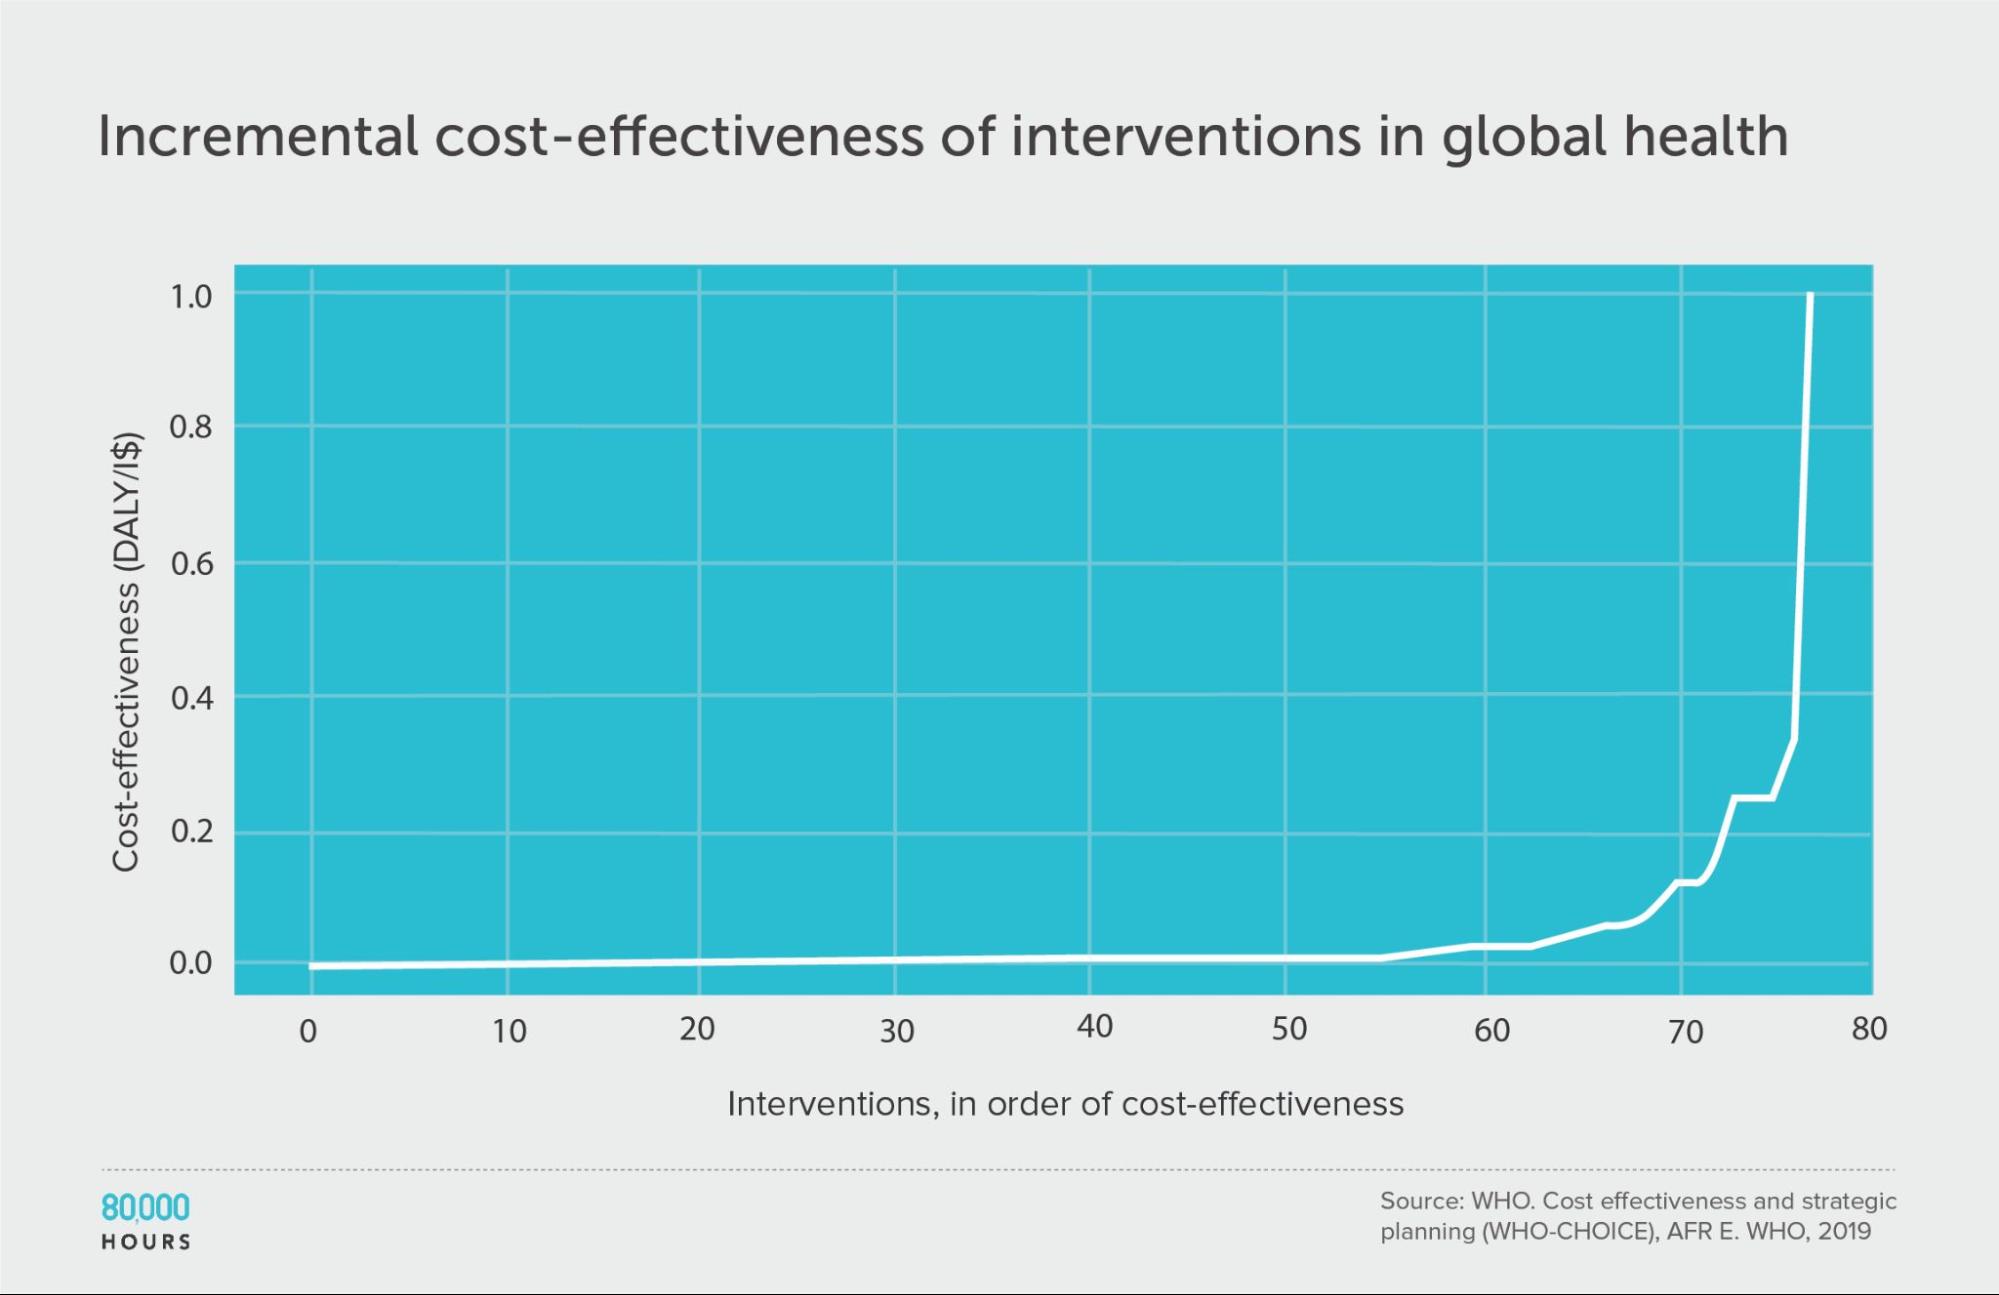 WHO CHOICE incremental cost effectiveness graph